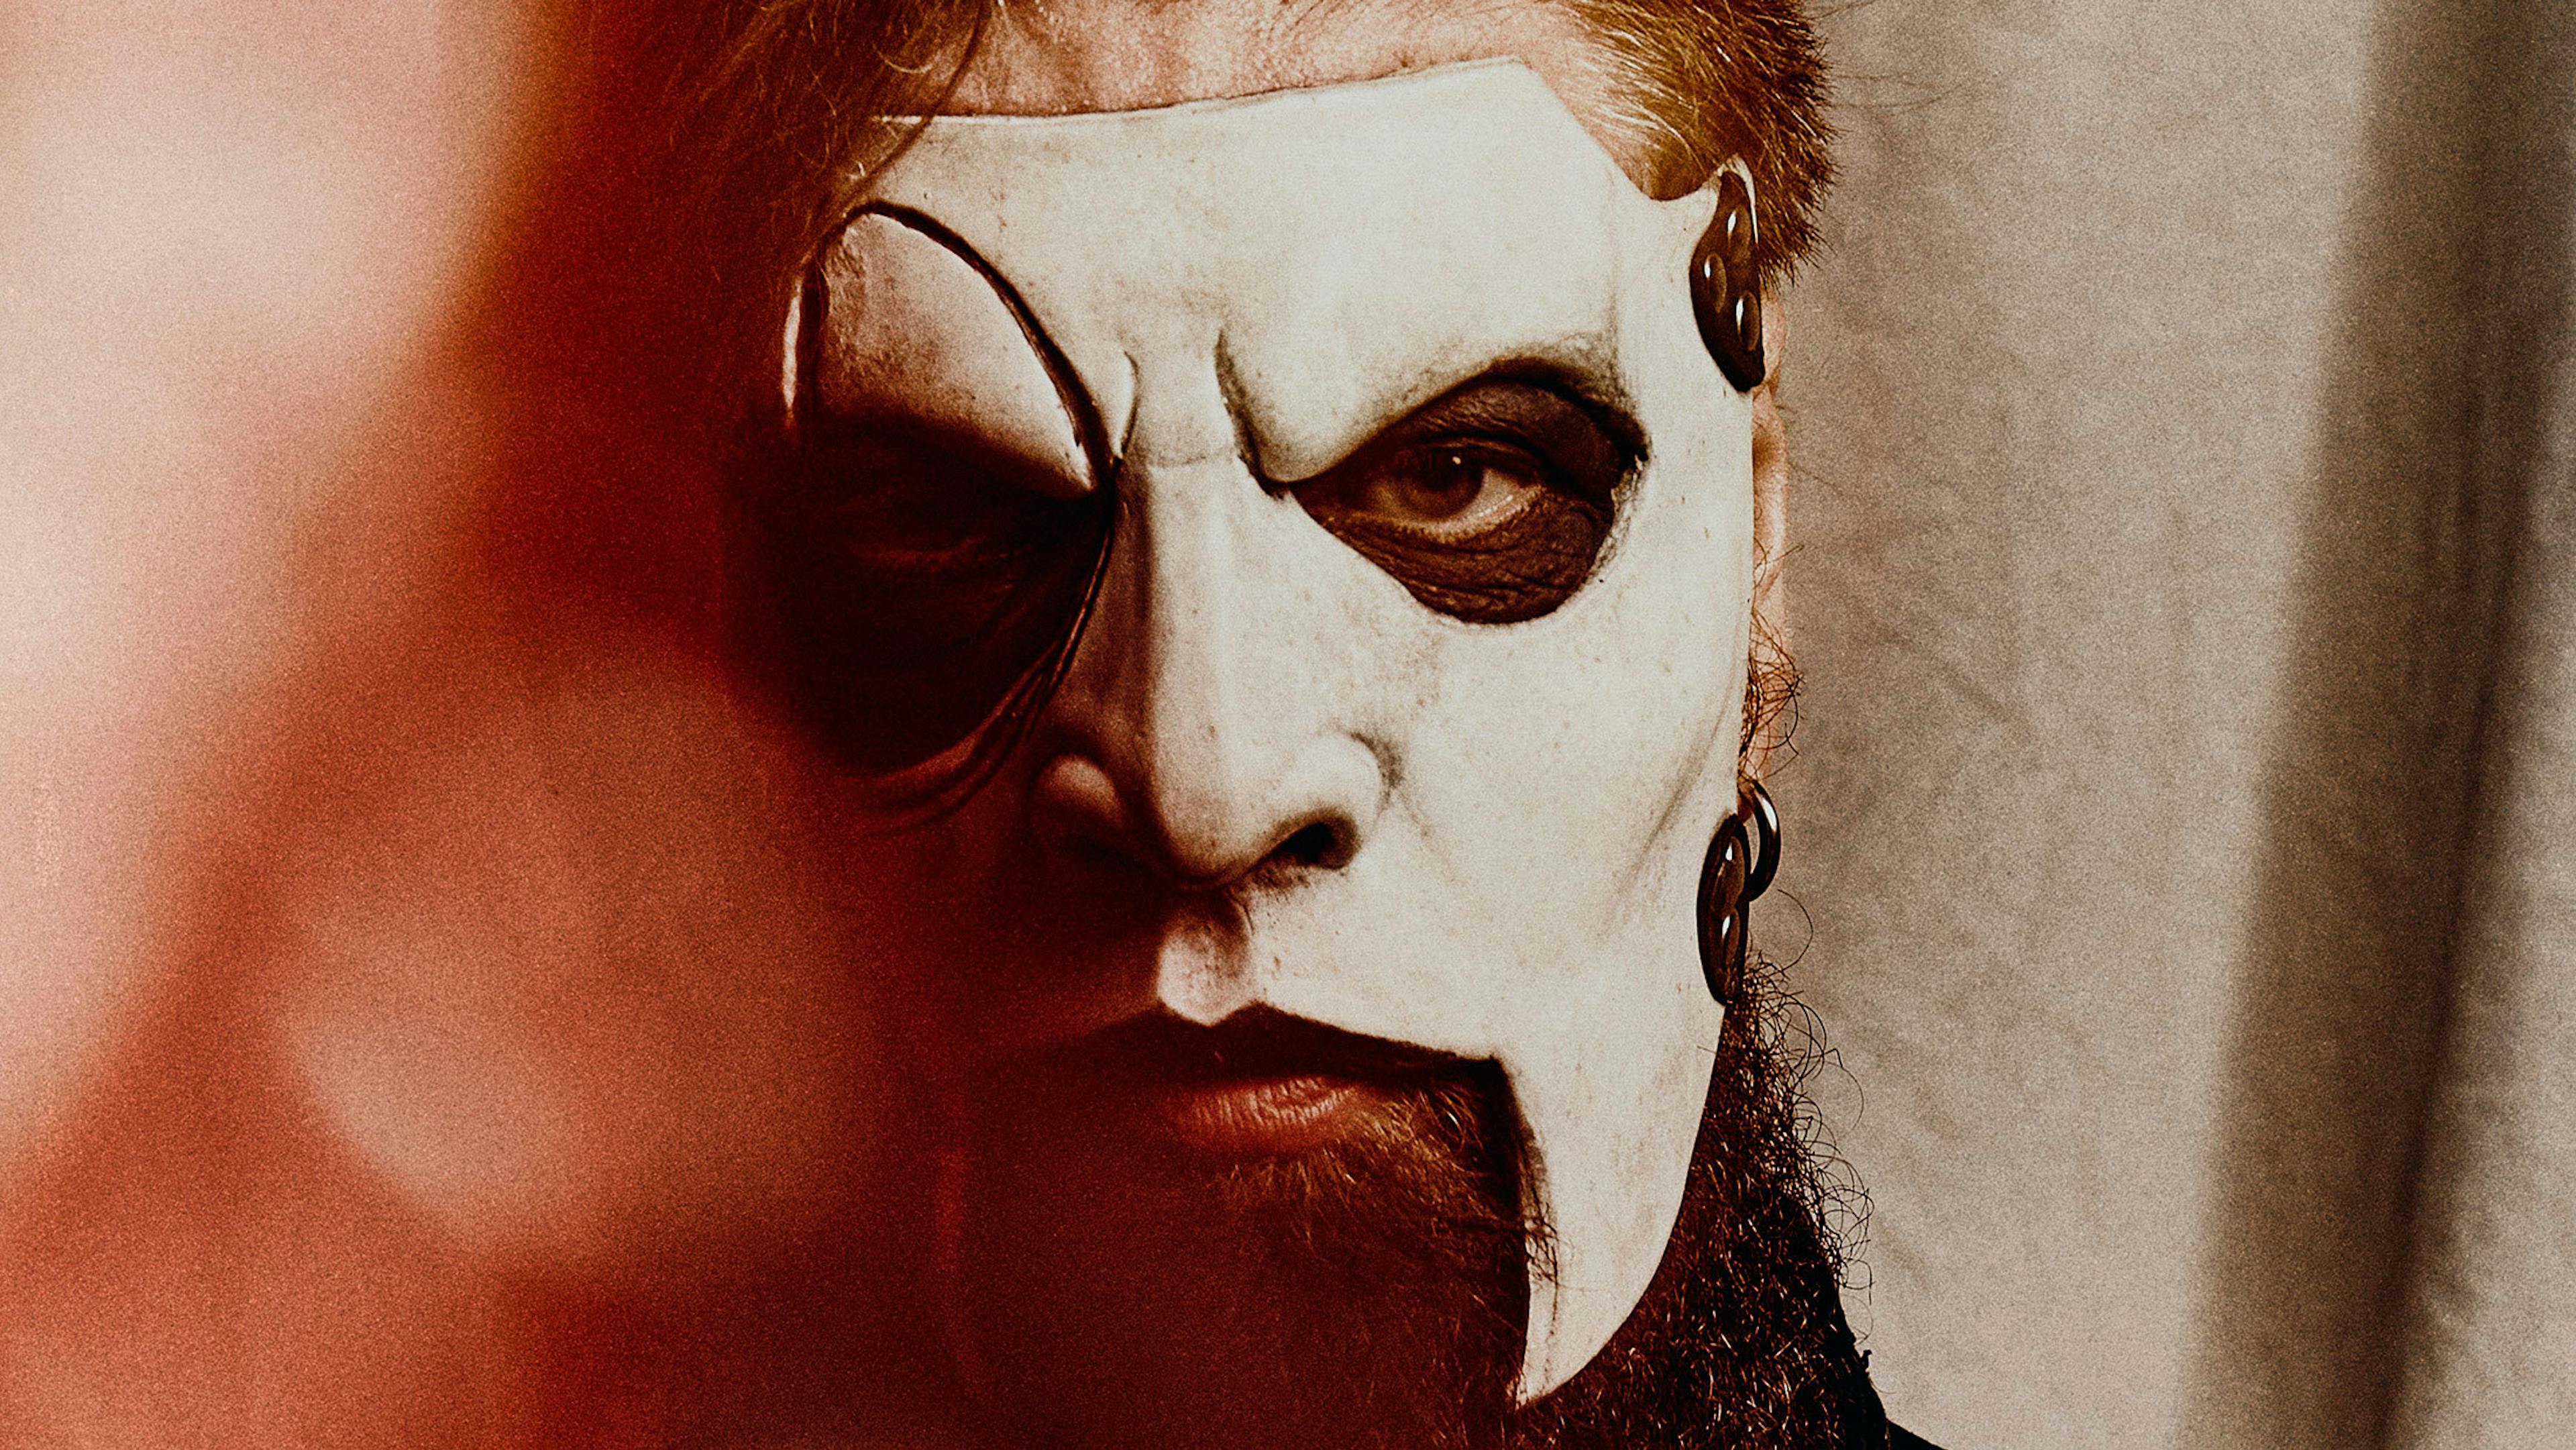 Harley-Davidson are teasing a collab with Slipknot’s Jim Root